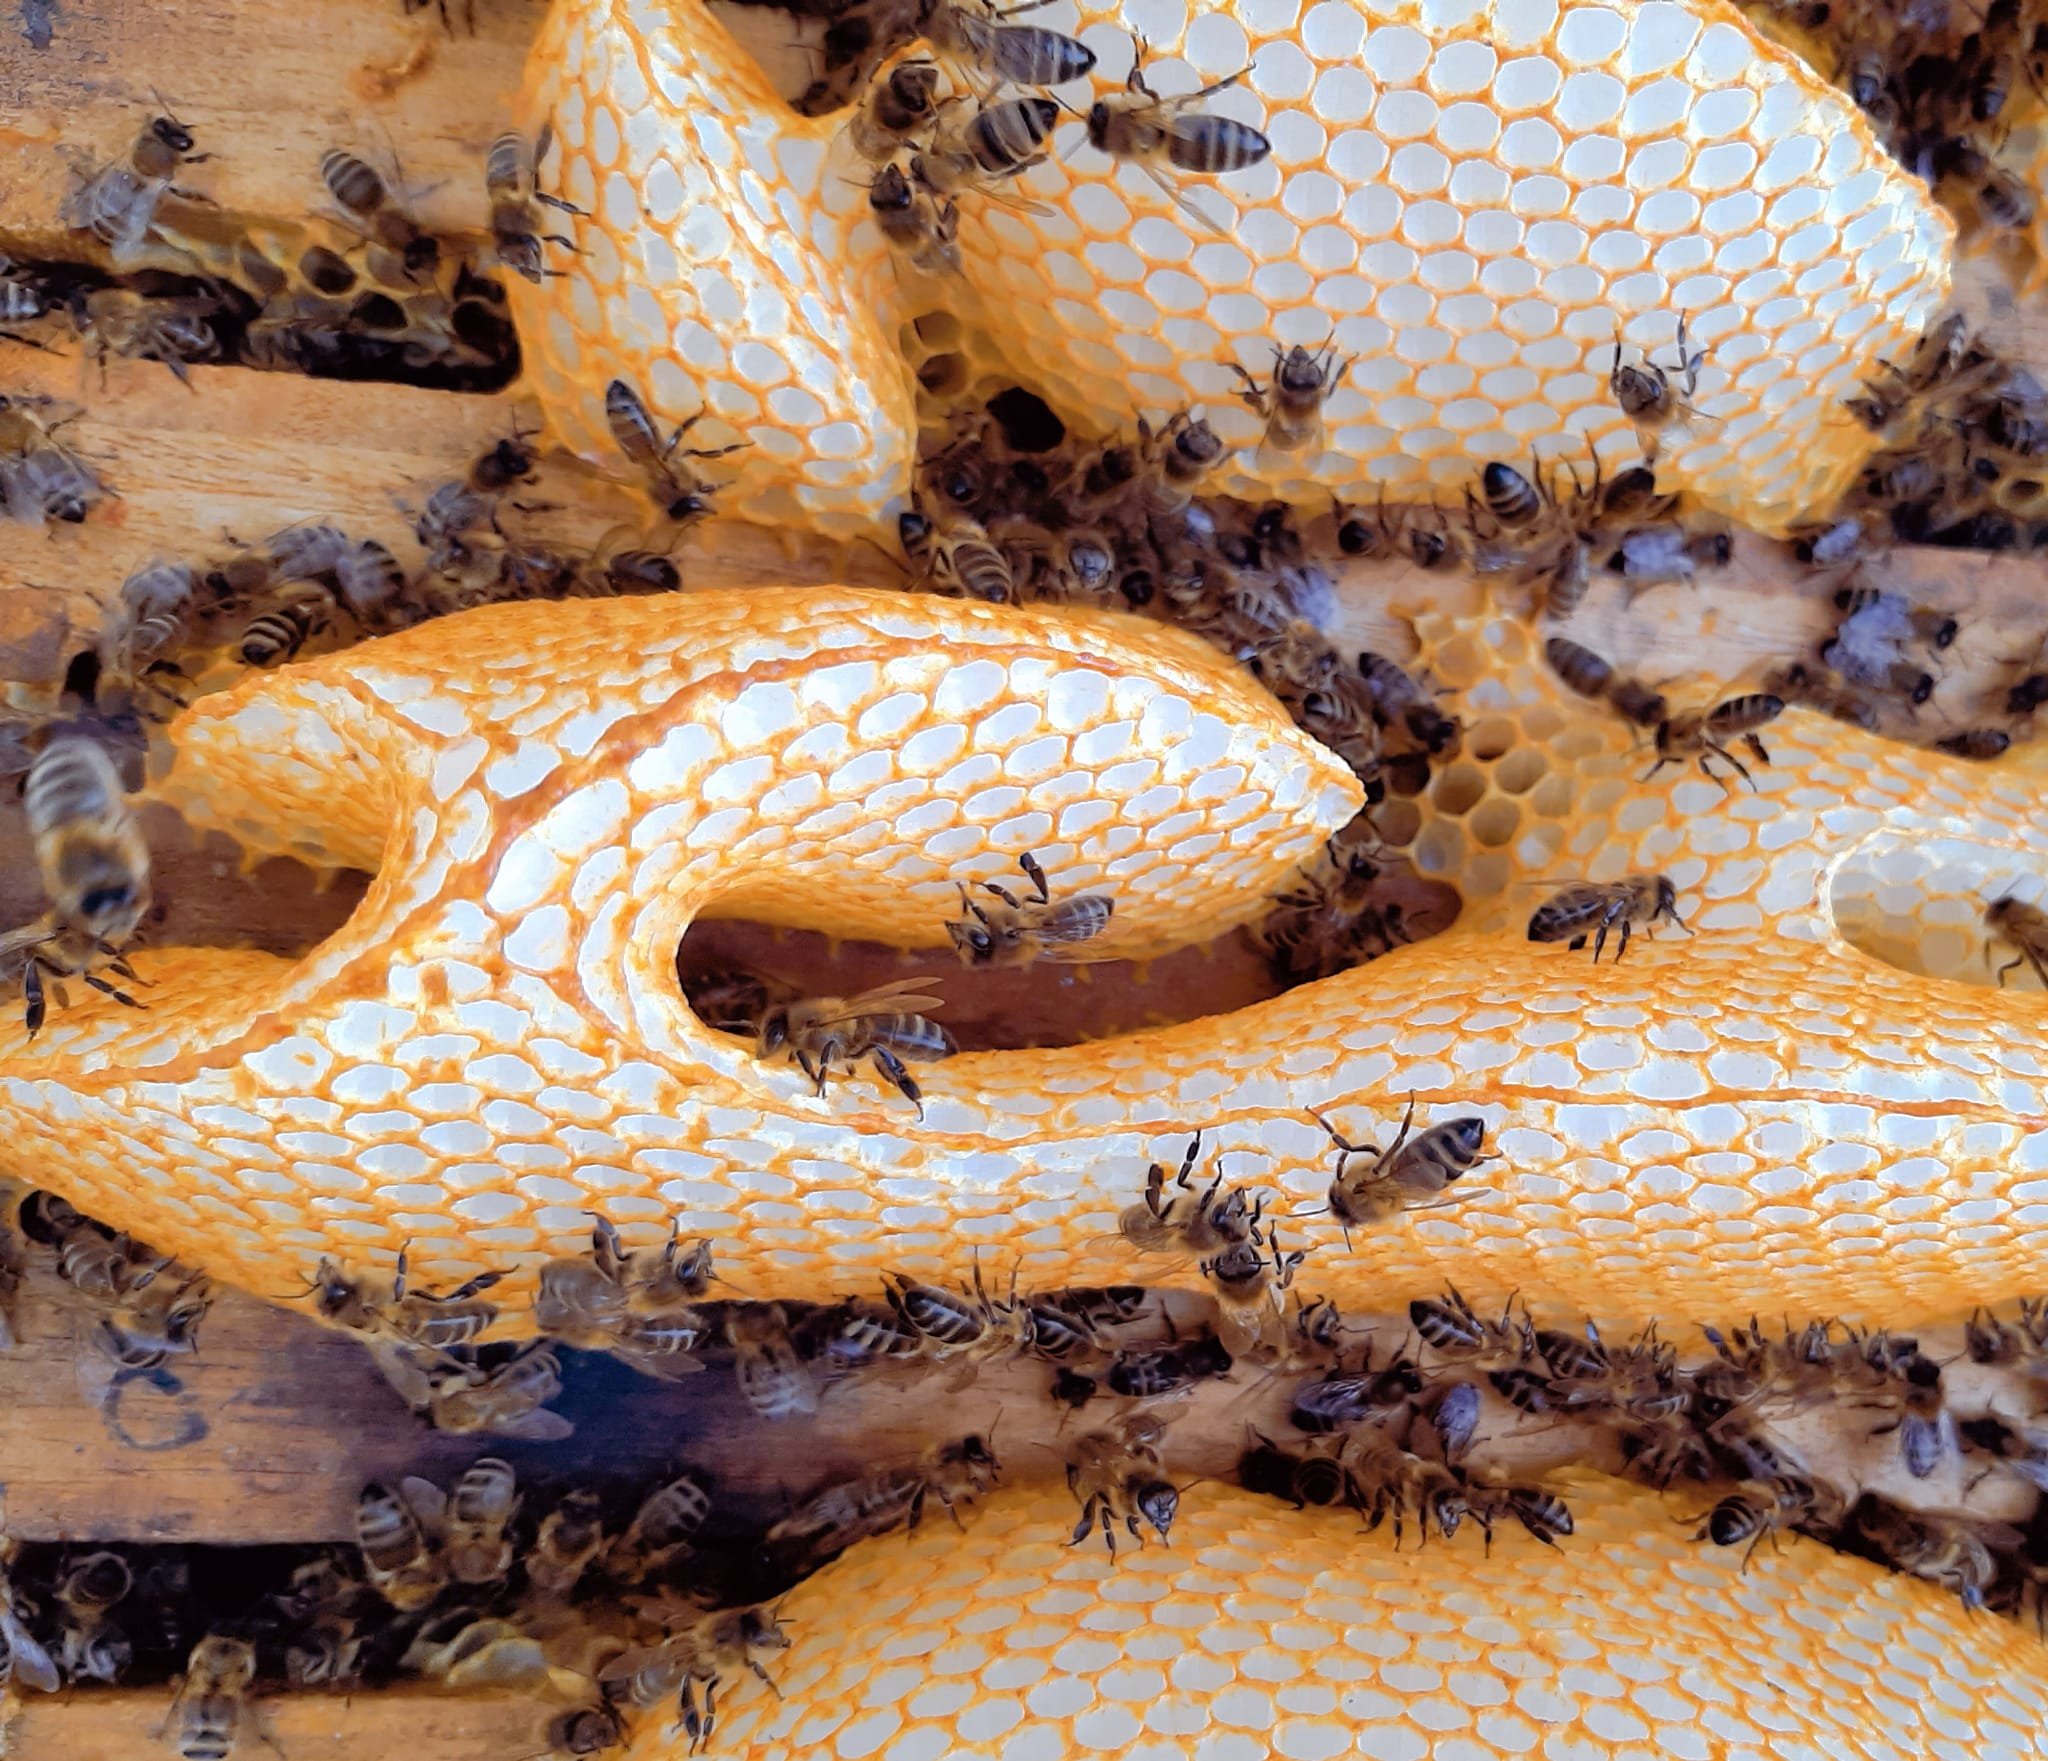 bees and honey comb 2.jpg